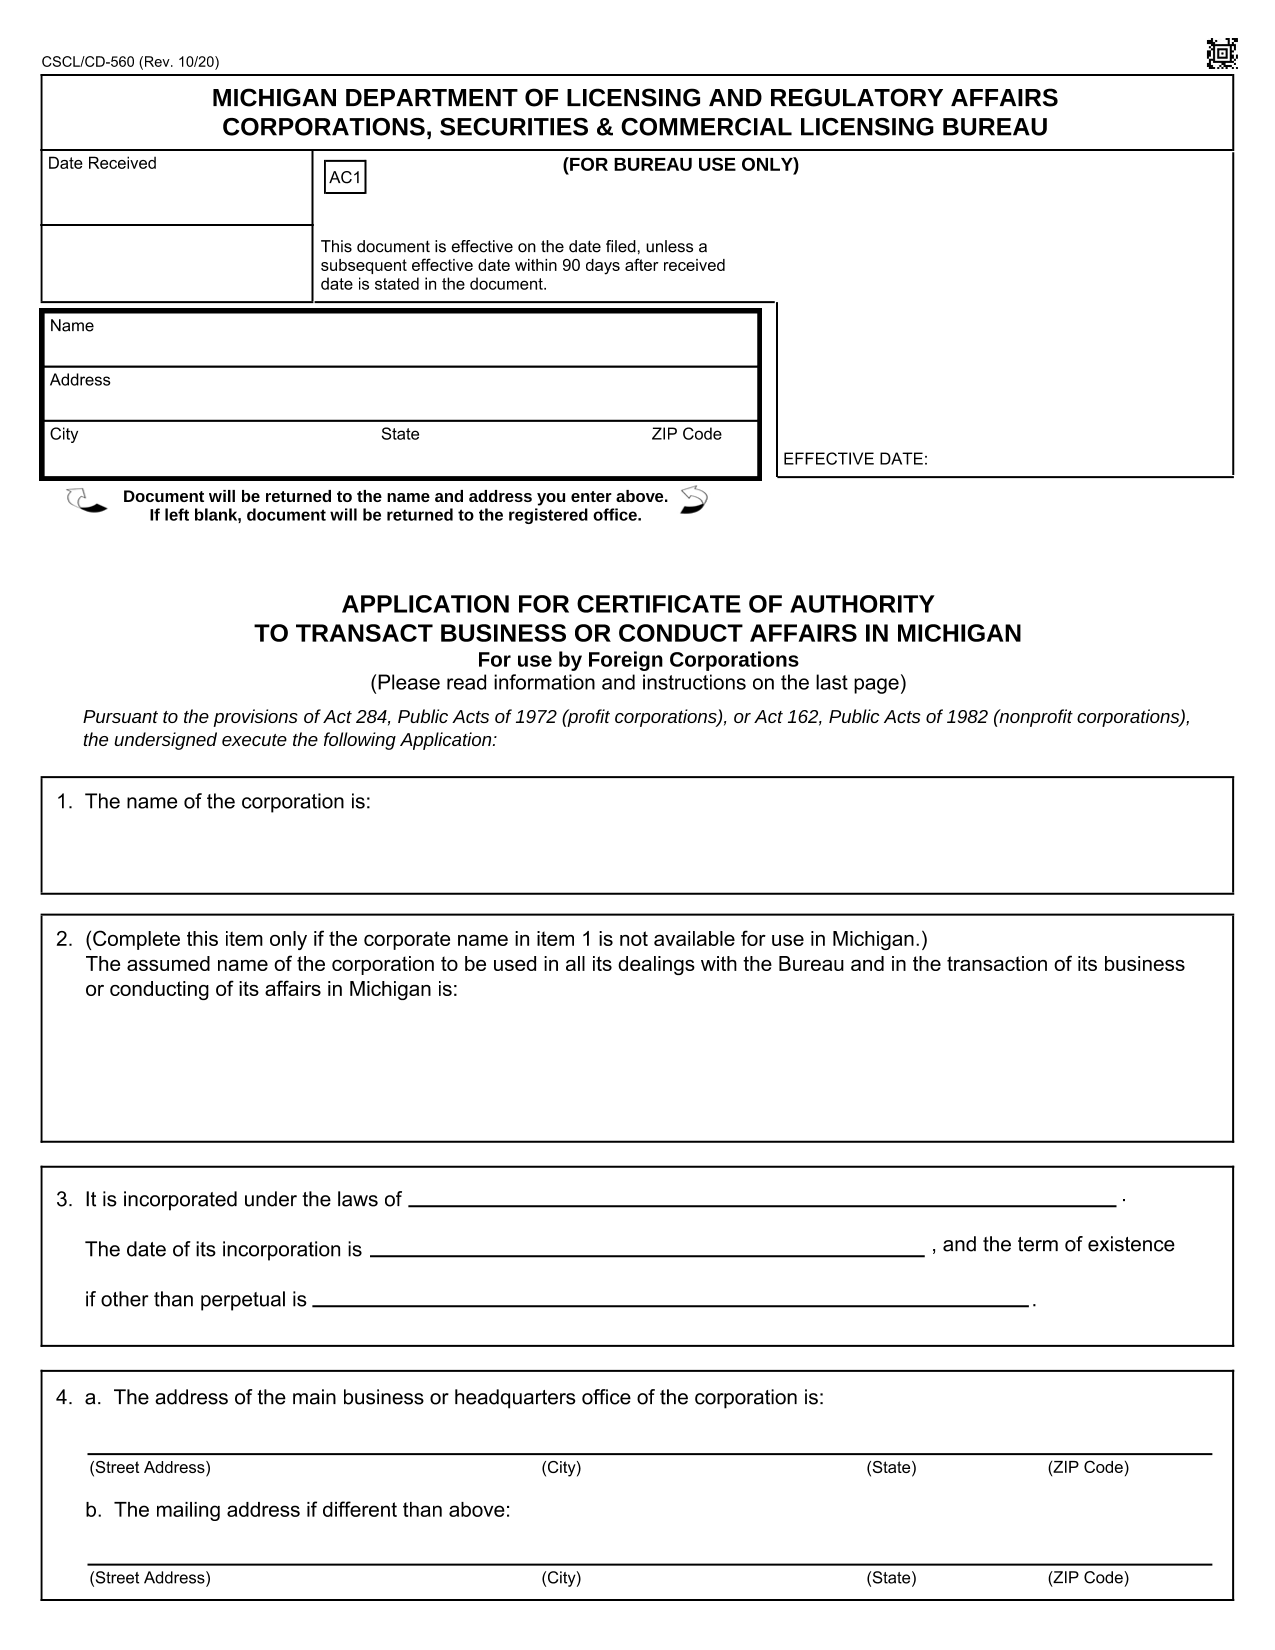 application-for-certificate-of-authority-to-transact-business-or-conduct-affairs-in-michigan